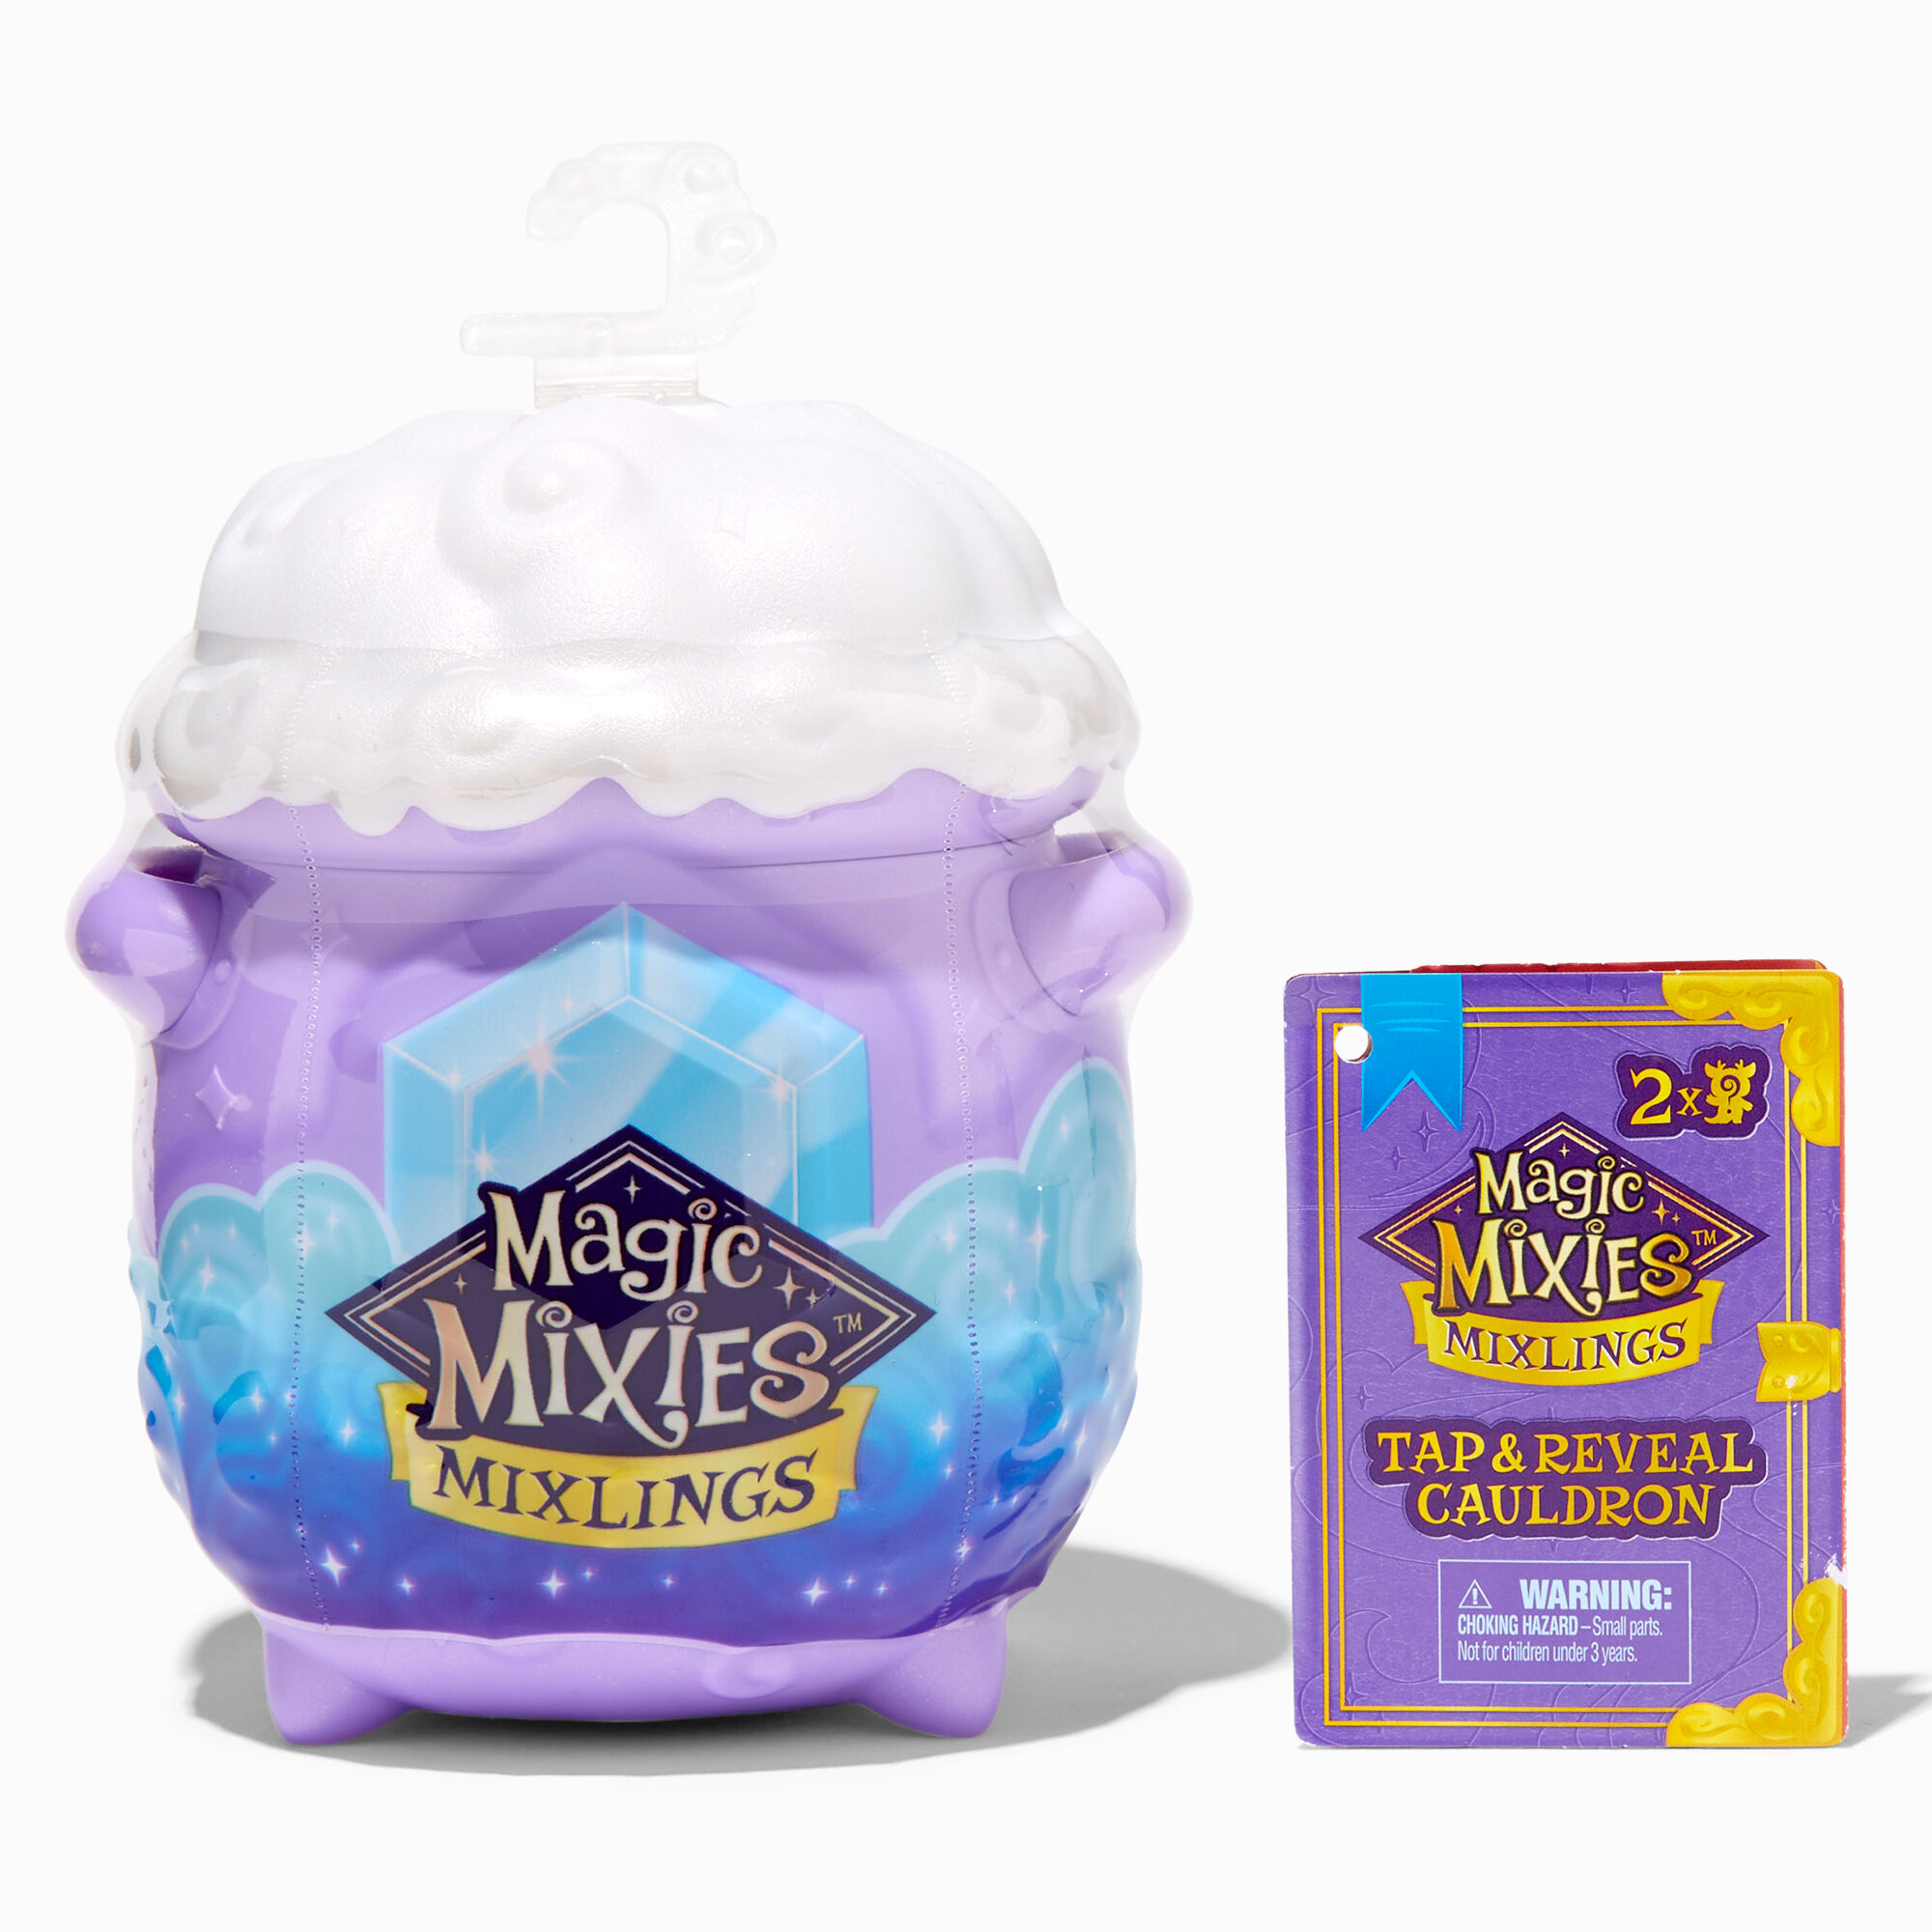 Magic Mixies, Mixlings Collector's Cauldron 1 Pack, Colors and